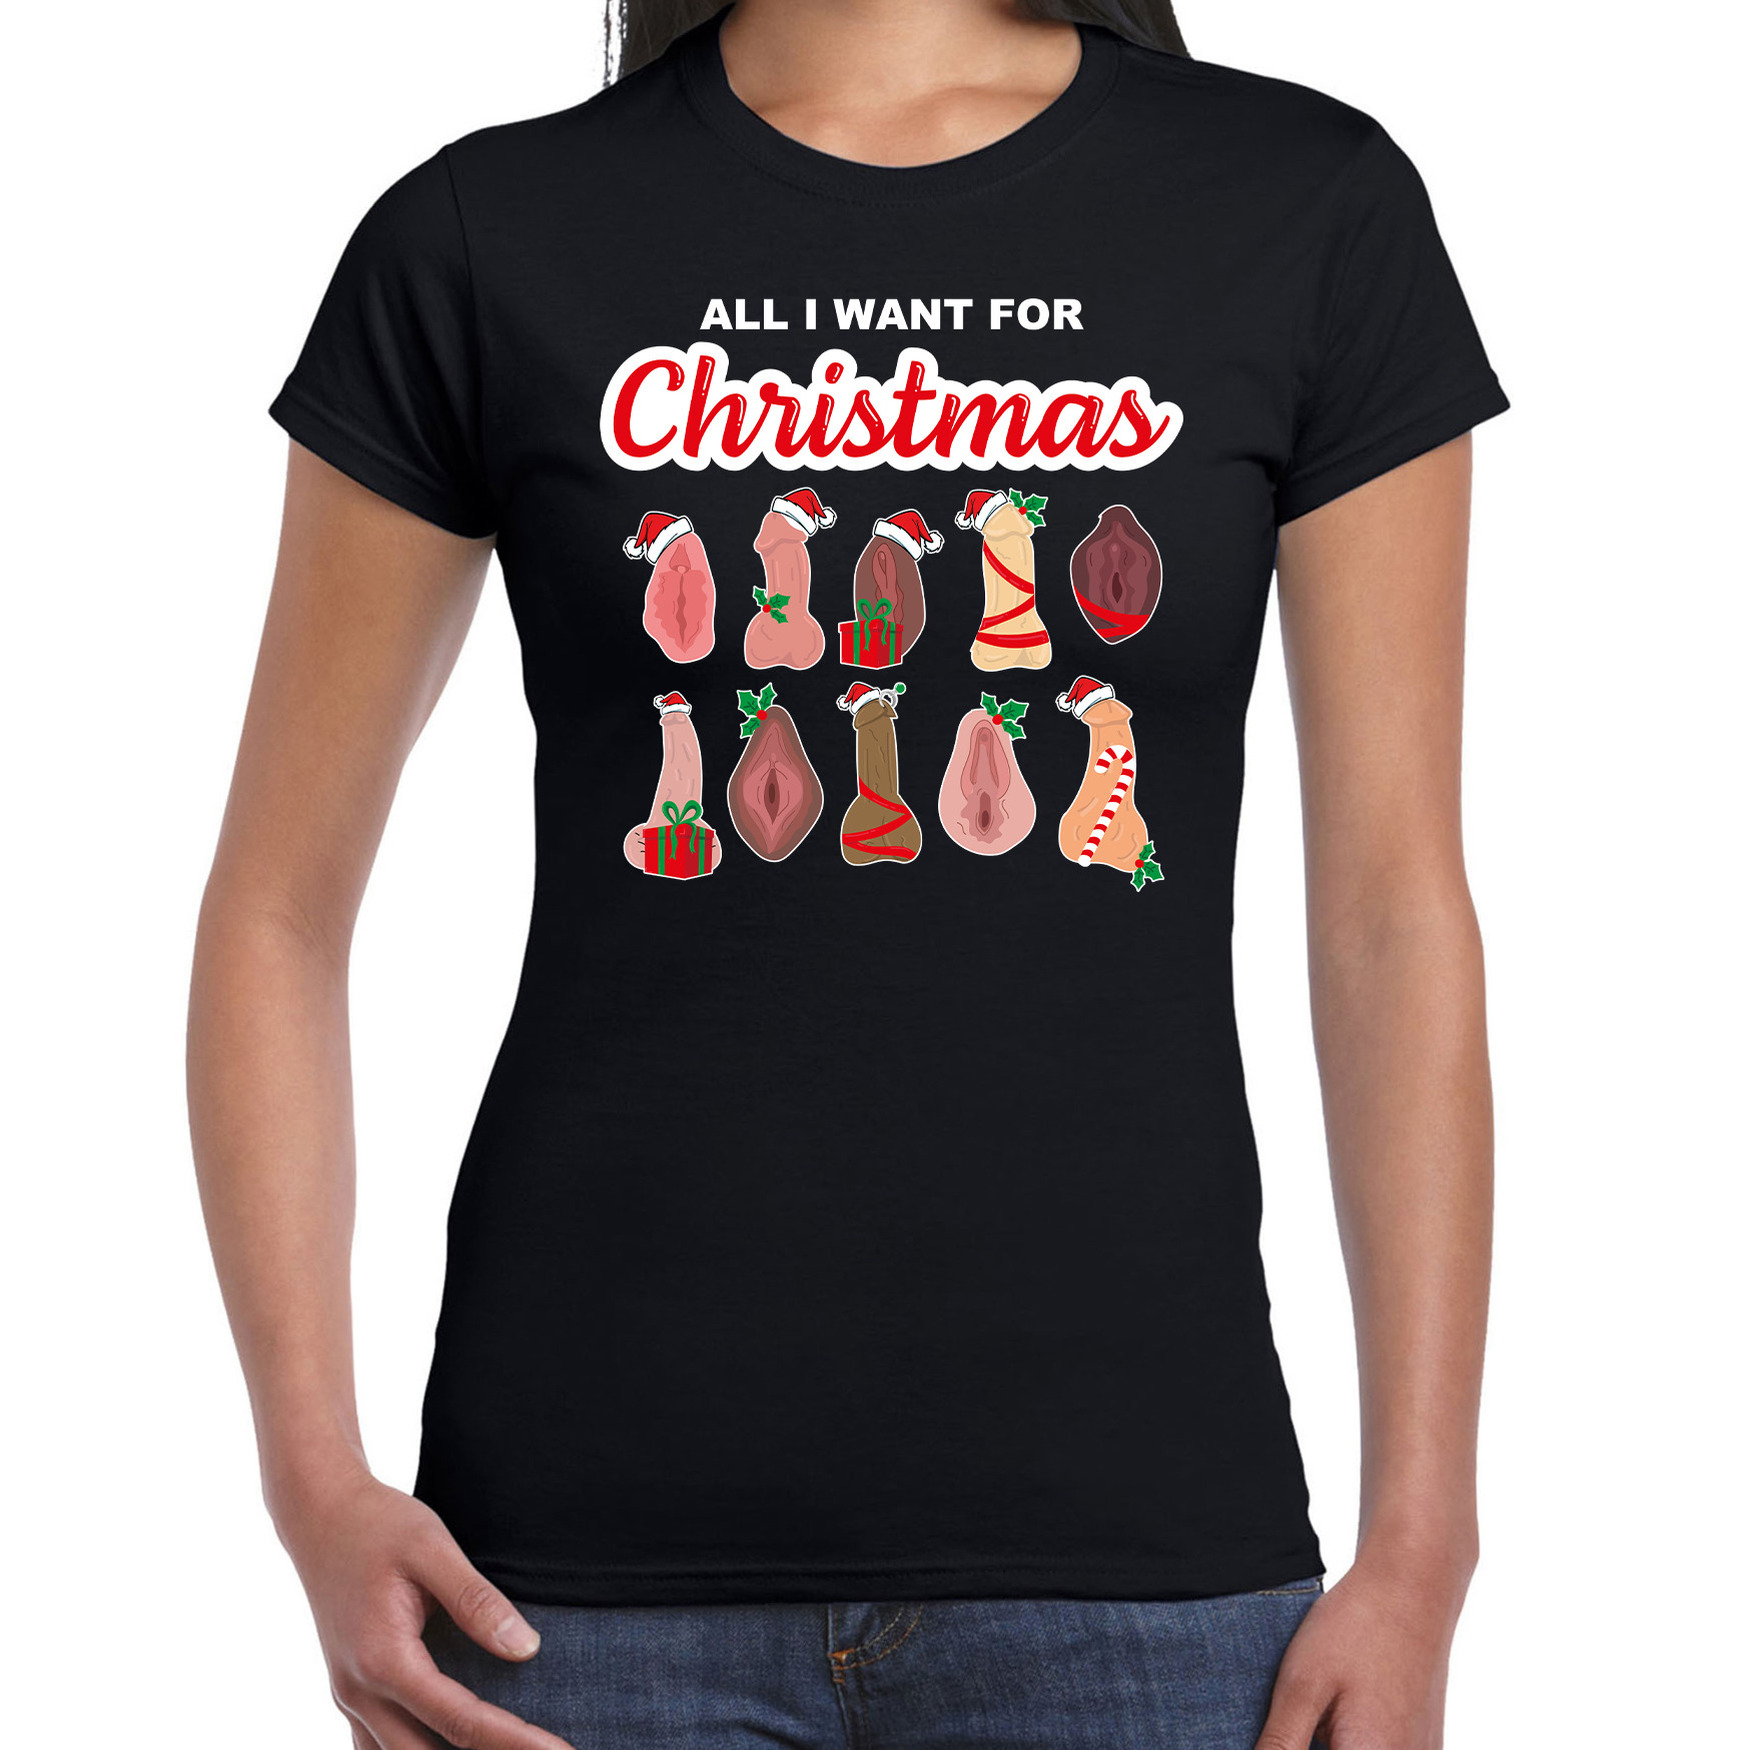 All I want for Christmas - piemels - vaginas fout Kerst t-shirt zwart voor dames